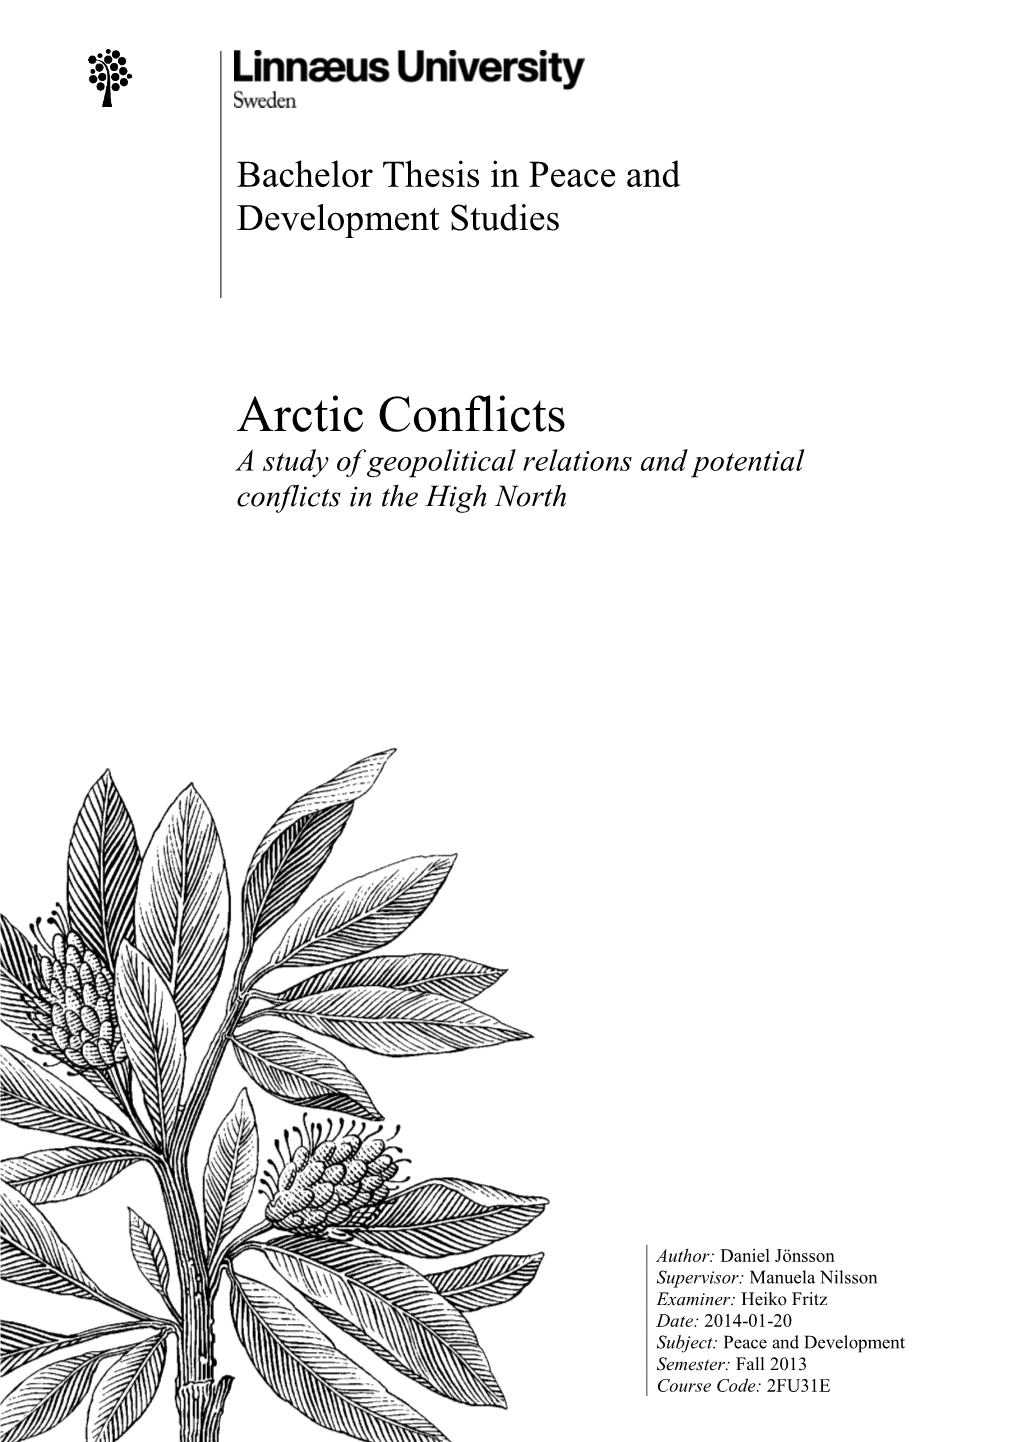 Arctic Conflicts a Study of Geopolitical Relations and Potential Conflicts in the High North